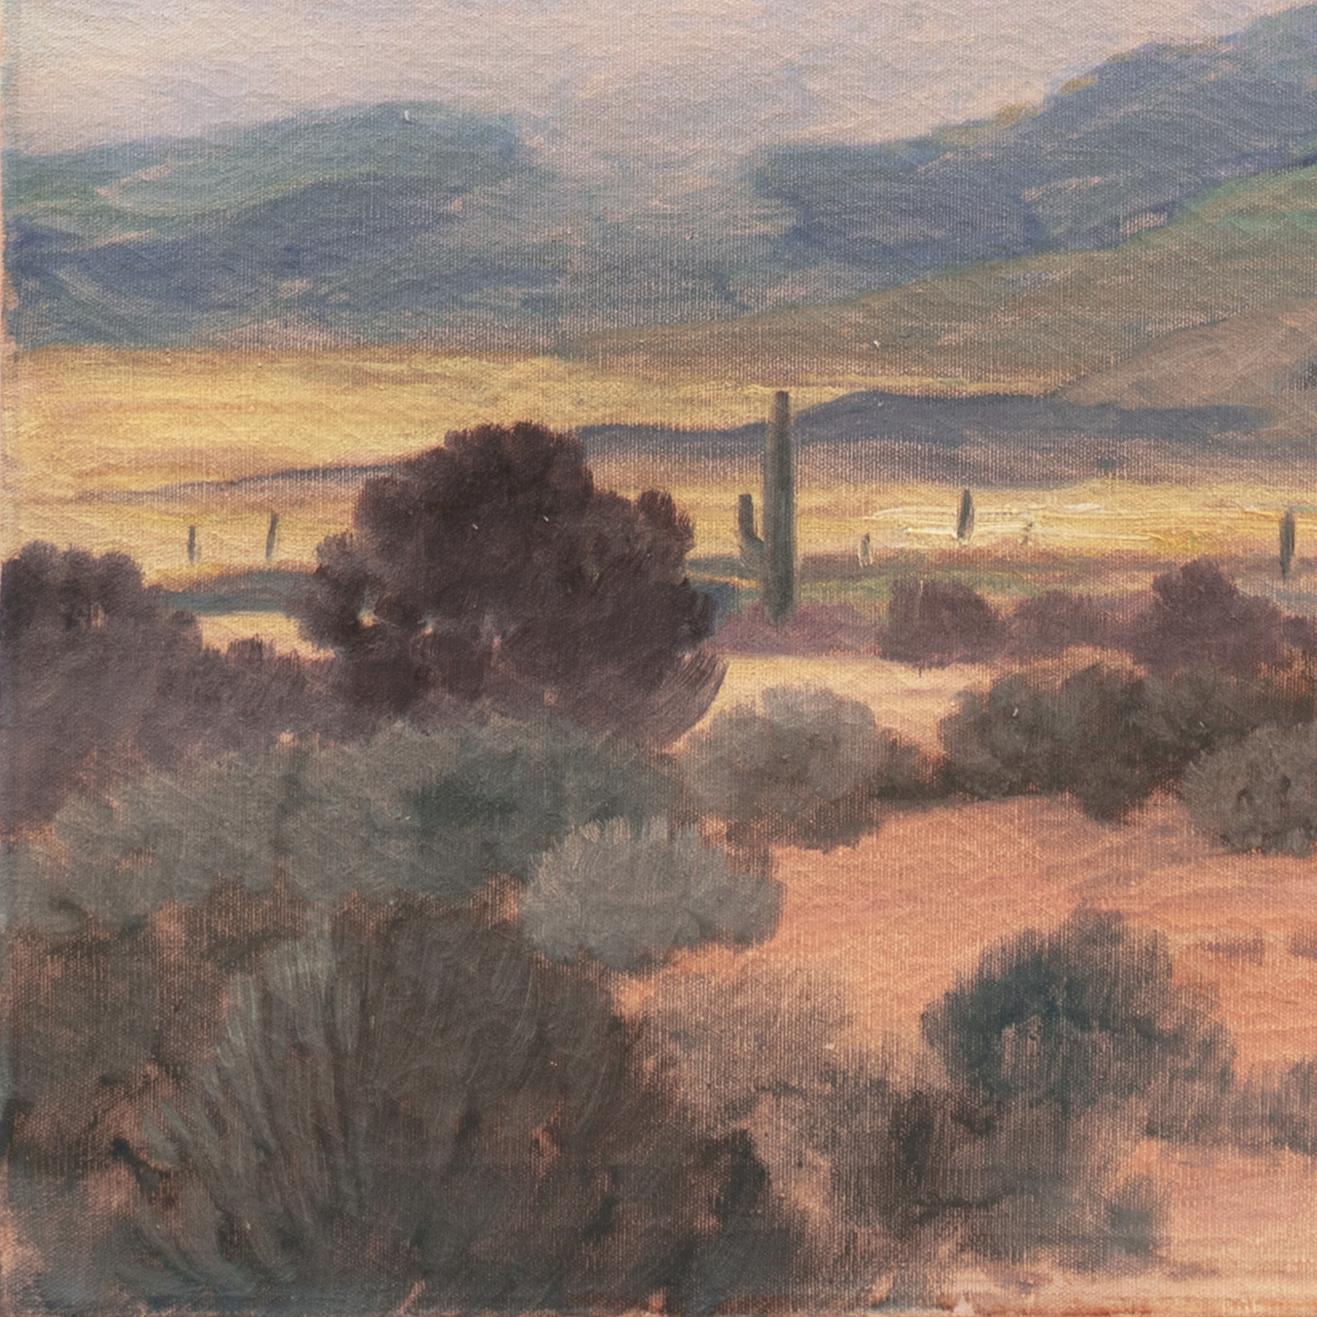 Signed lower right, 'Bickerstaff' for George Sanders Bickerstaff (American, 1893-1954) and painted circa 1950.

This California landscape painter was born in Arizona and studied at the Art Institute of Chicago. He lived and painted in Texas before